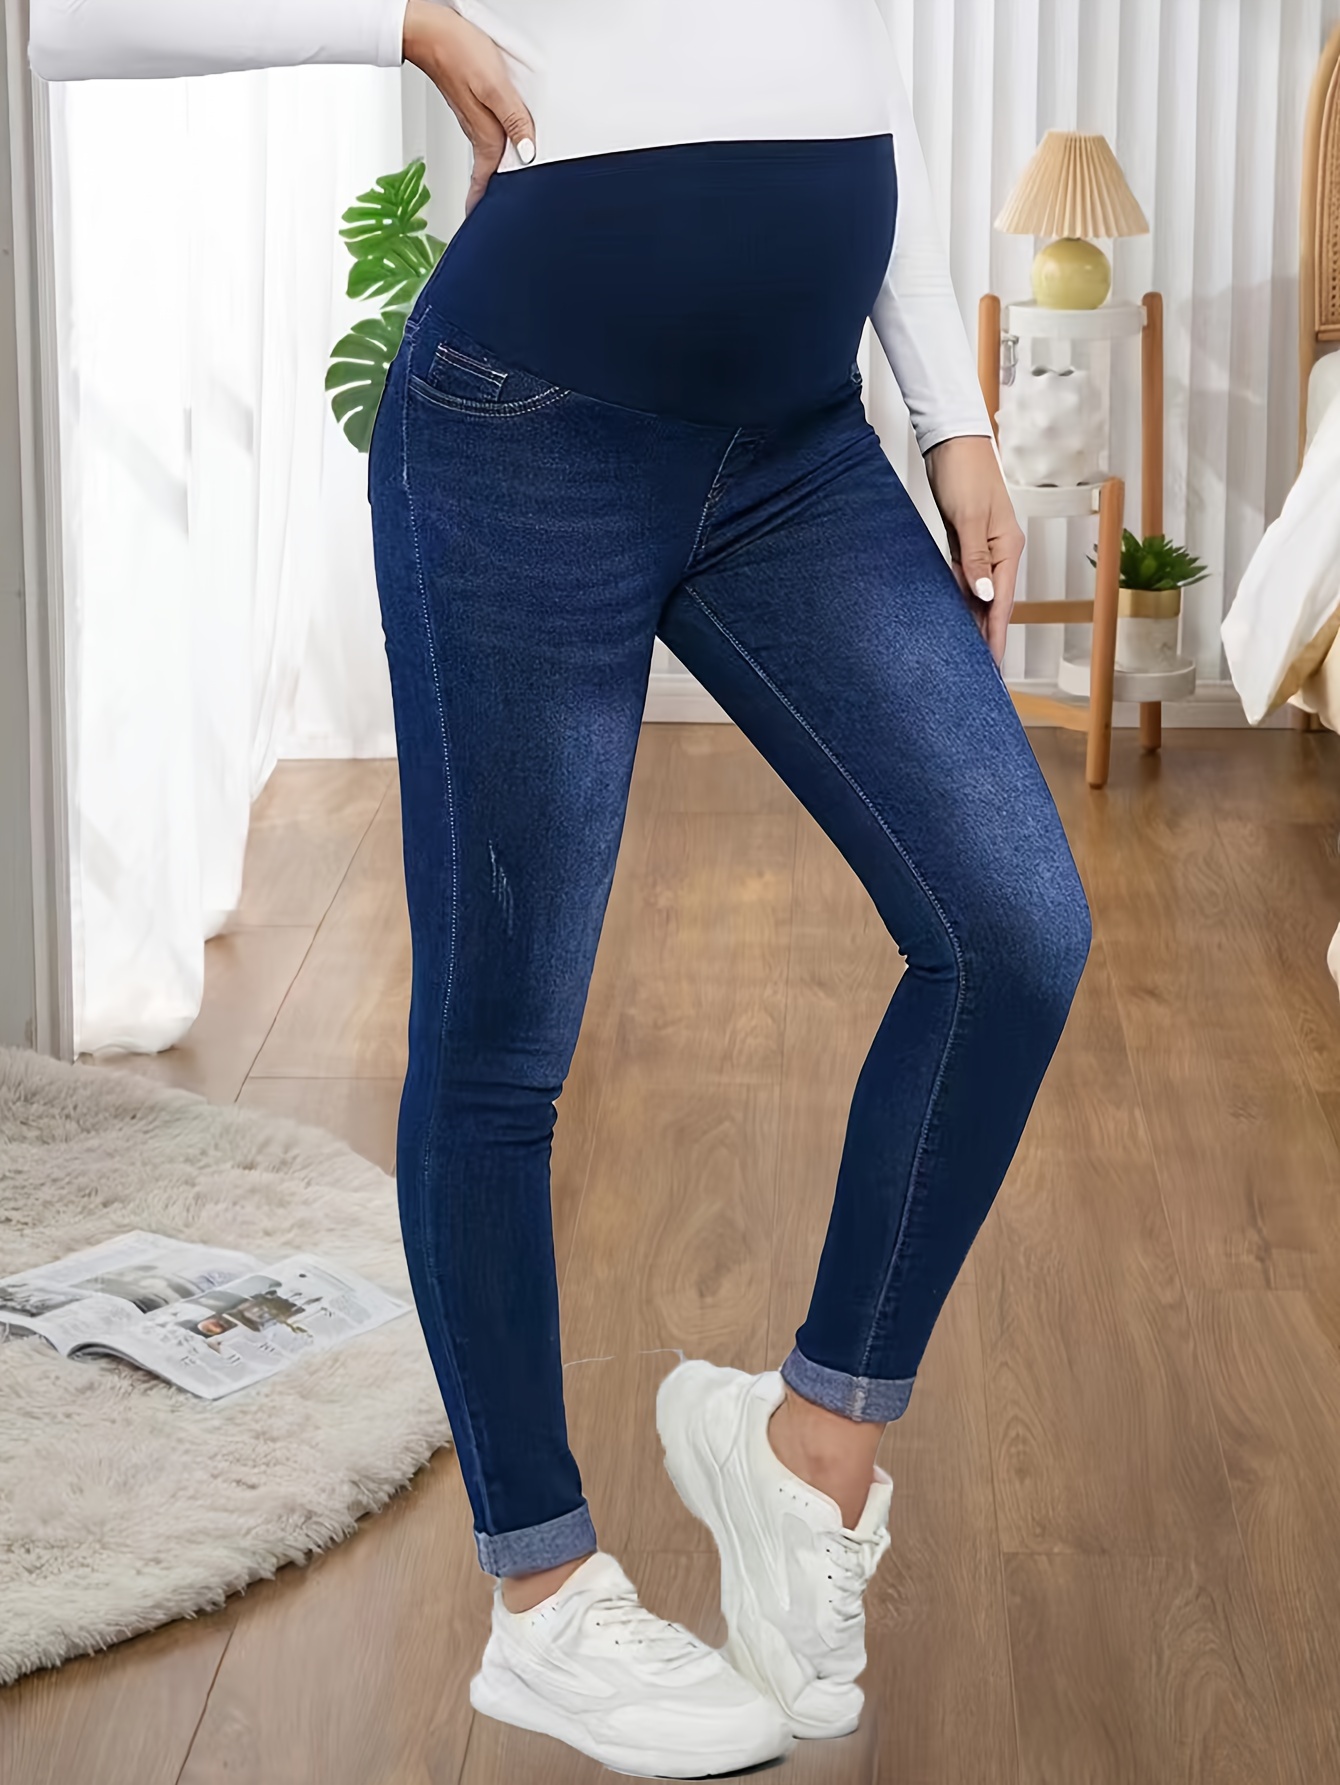 Women's Maternity Solid Jeans Fashion Casual Denim Pants, Pregnant Women's  Clothing